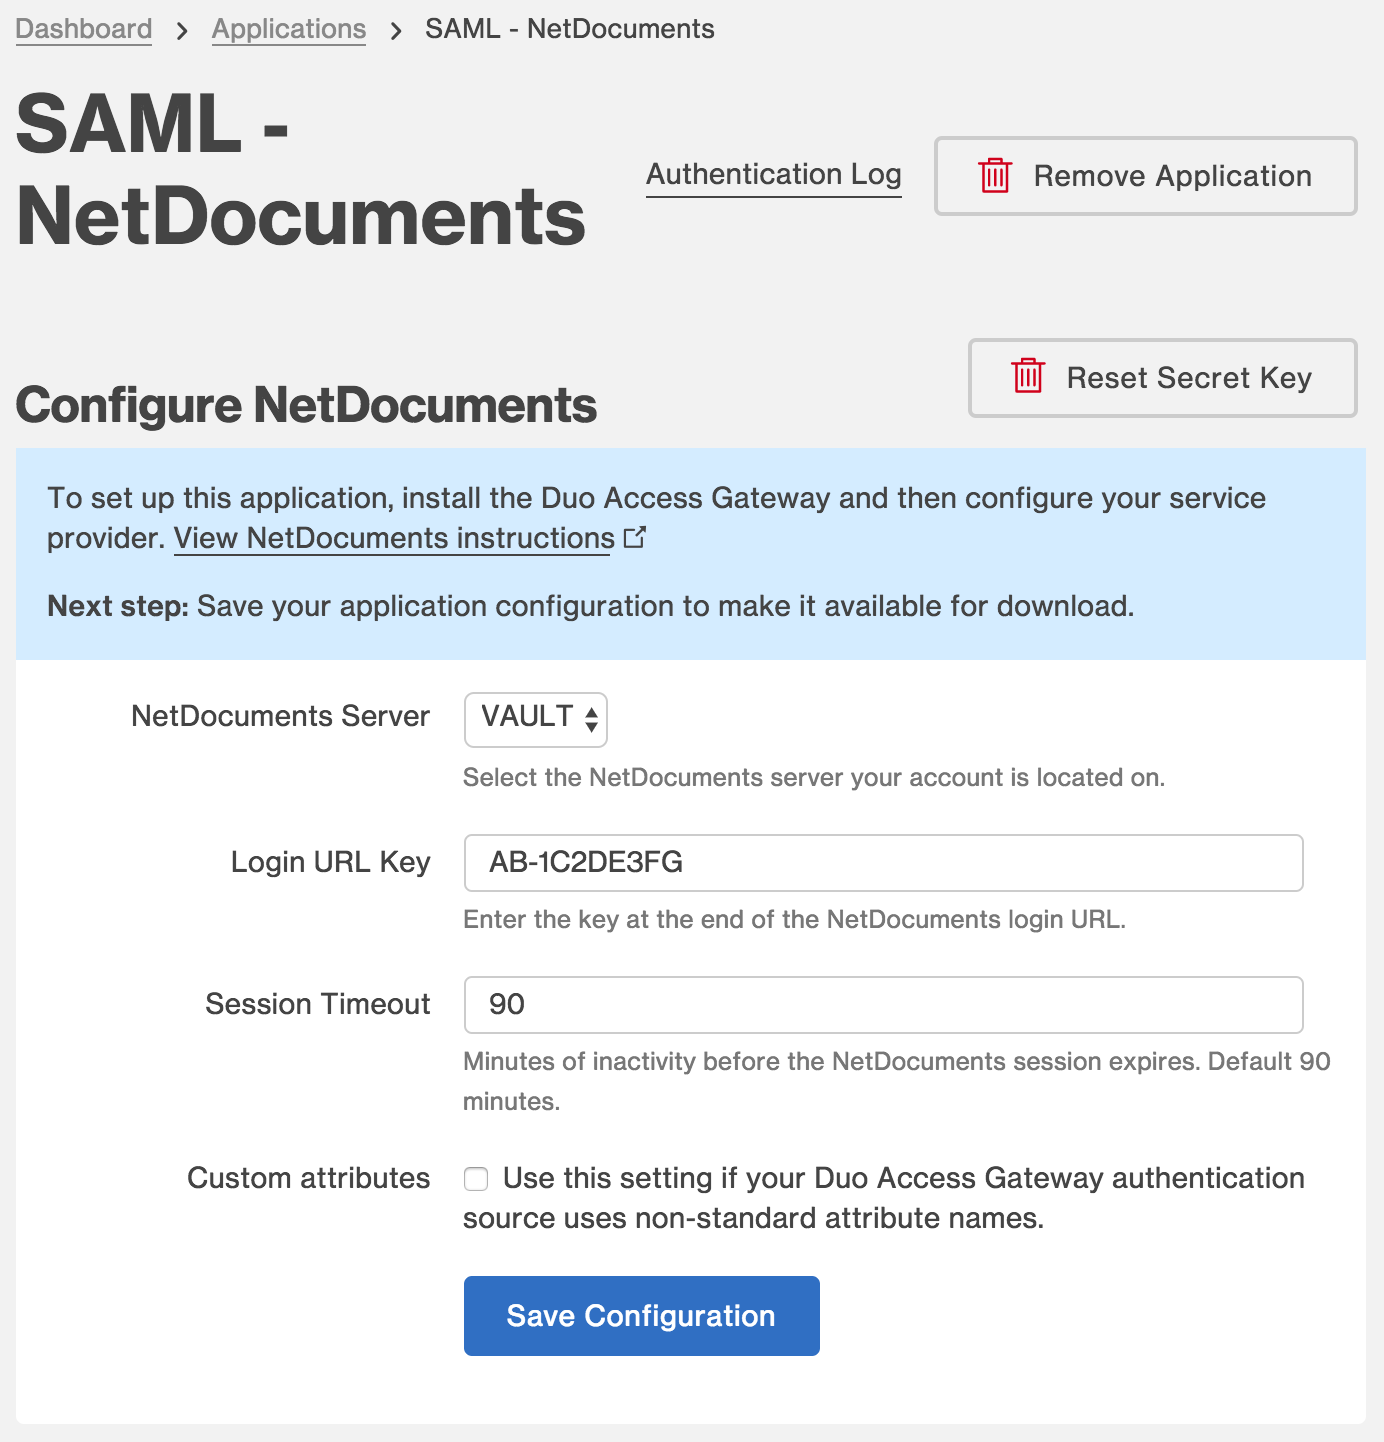 Duo NetDocuments Application Settings